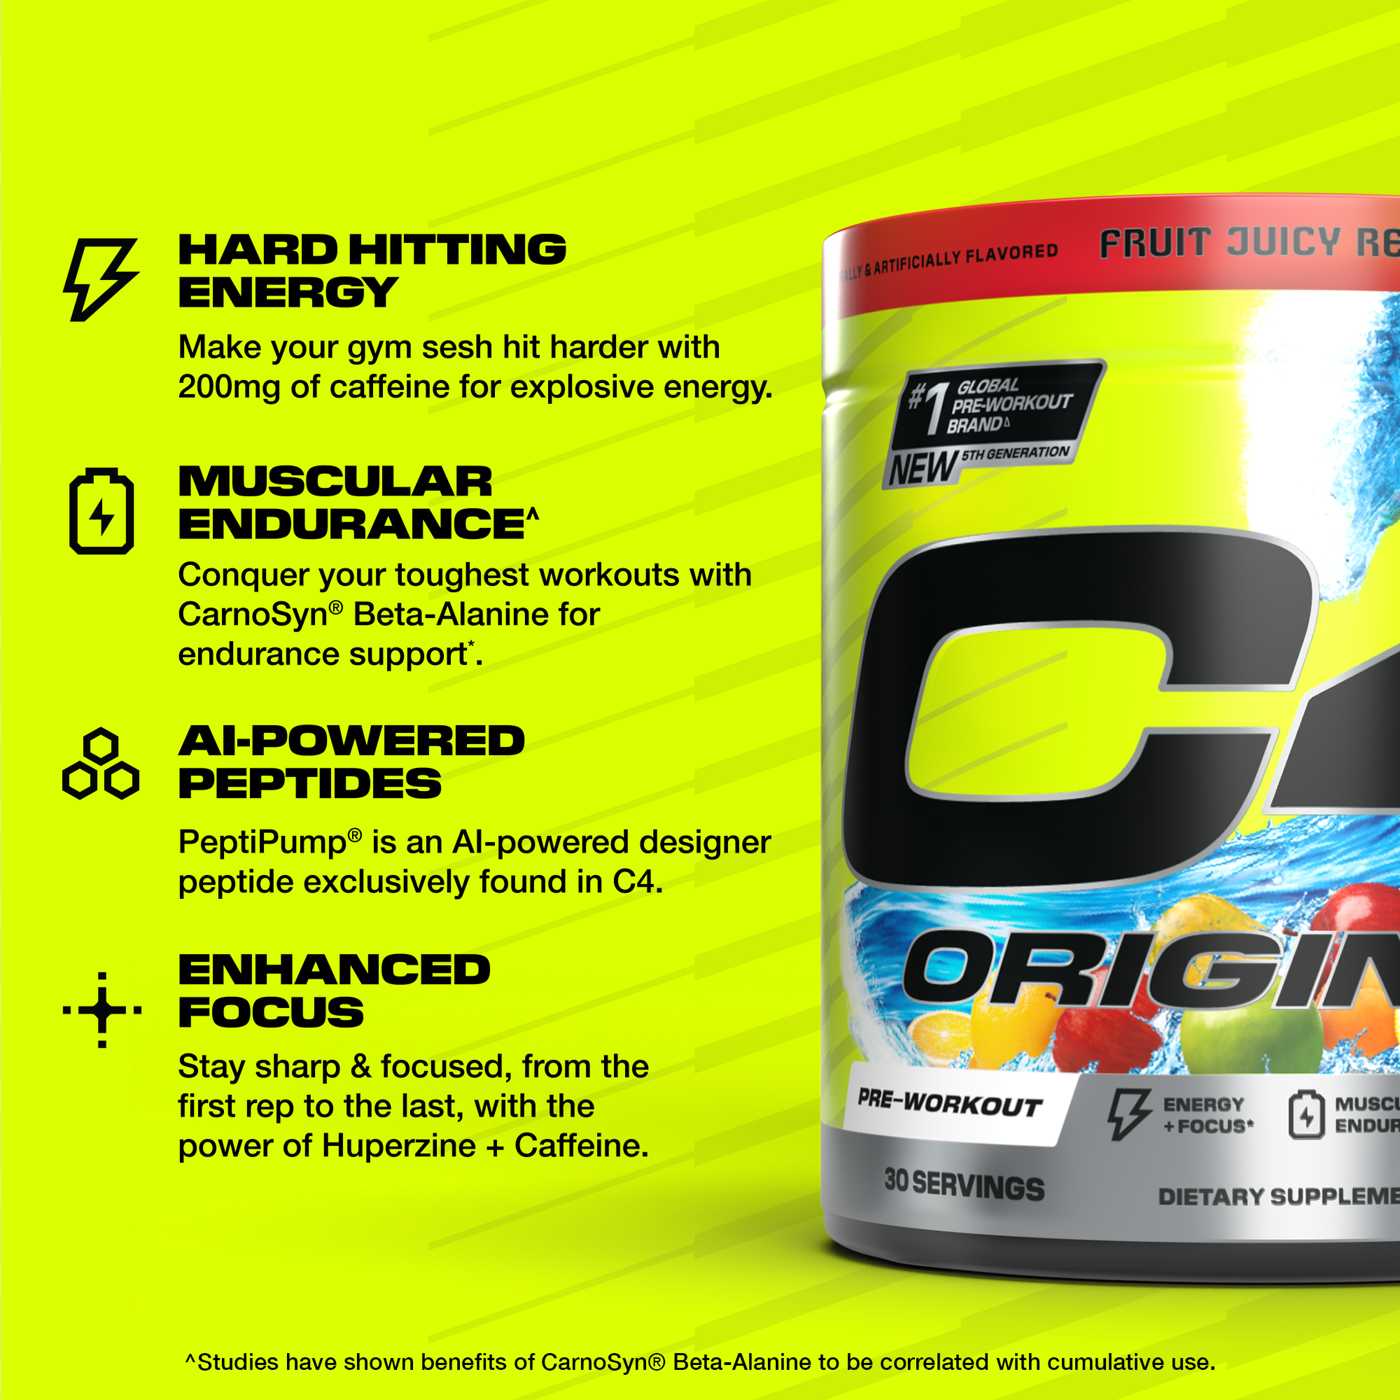 Cellucor C4 Original Pre-Workout - Hawaiian Punch Fruit Juicy Red; image 4 of 6